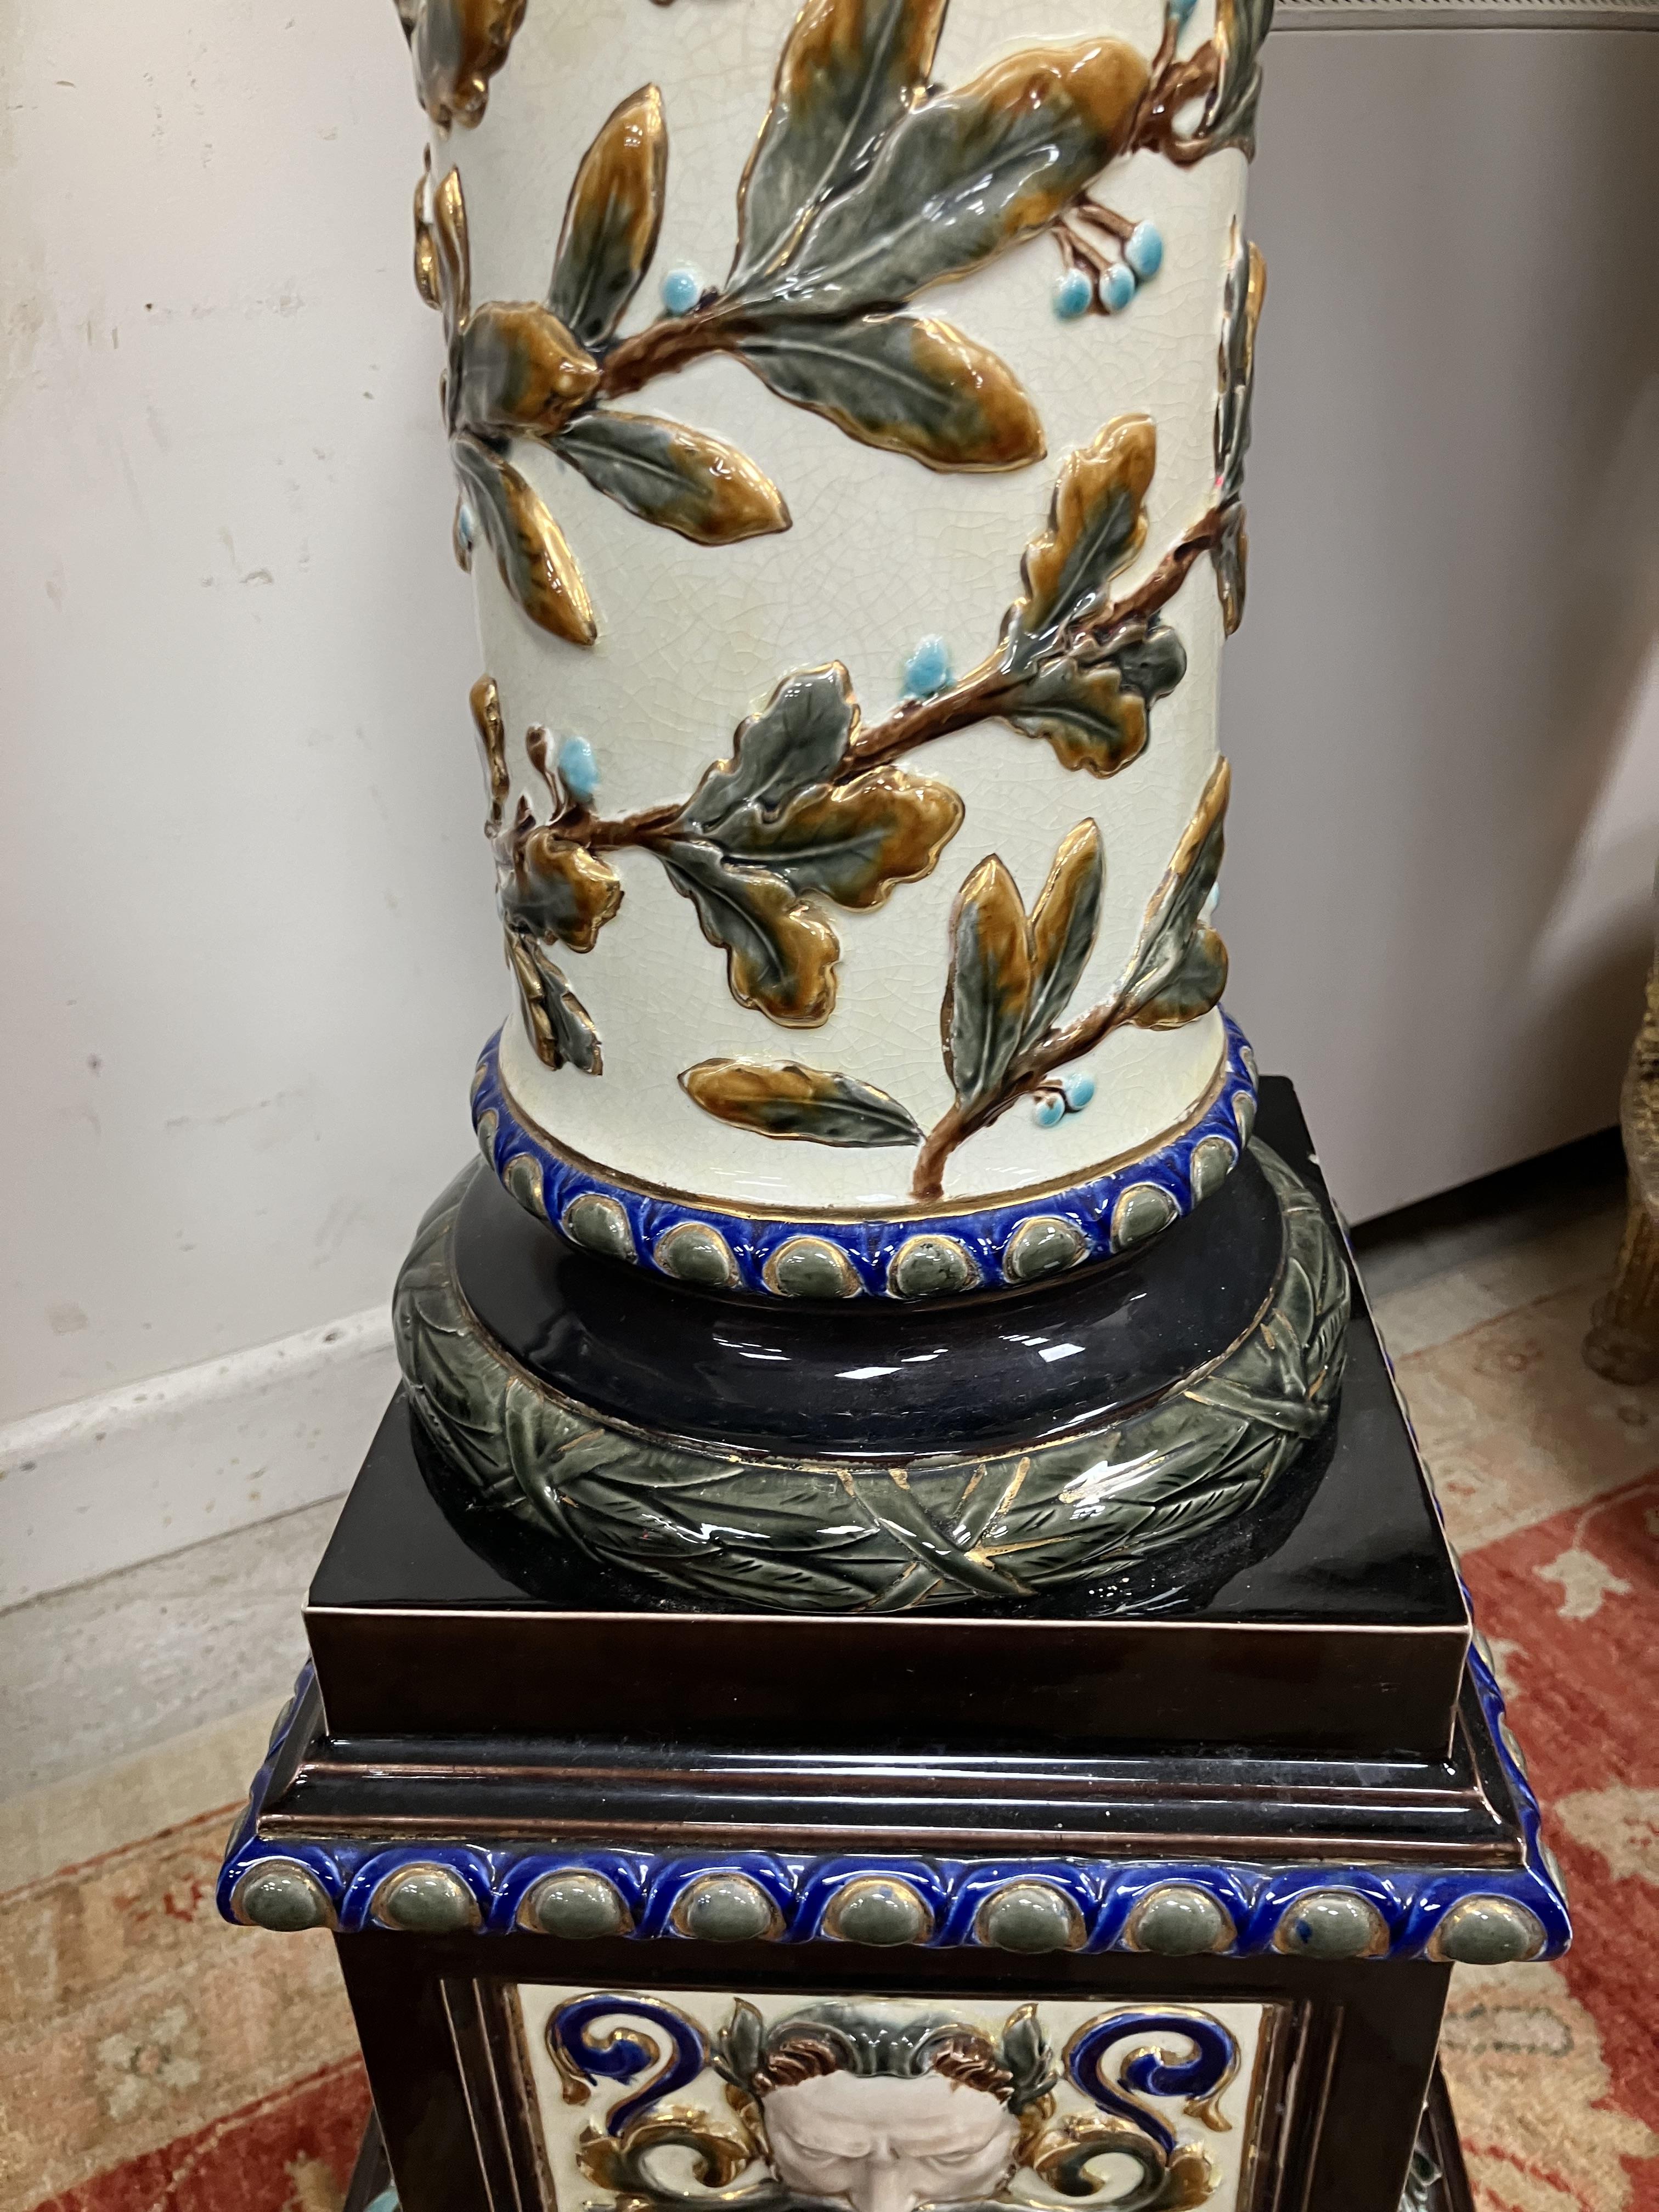 A circa 1900 Swedish majolica urn stand by Rörstand with all over relief work decoration on a - Image 35 of 44